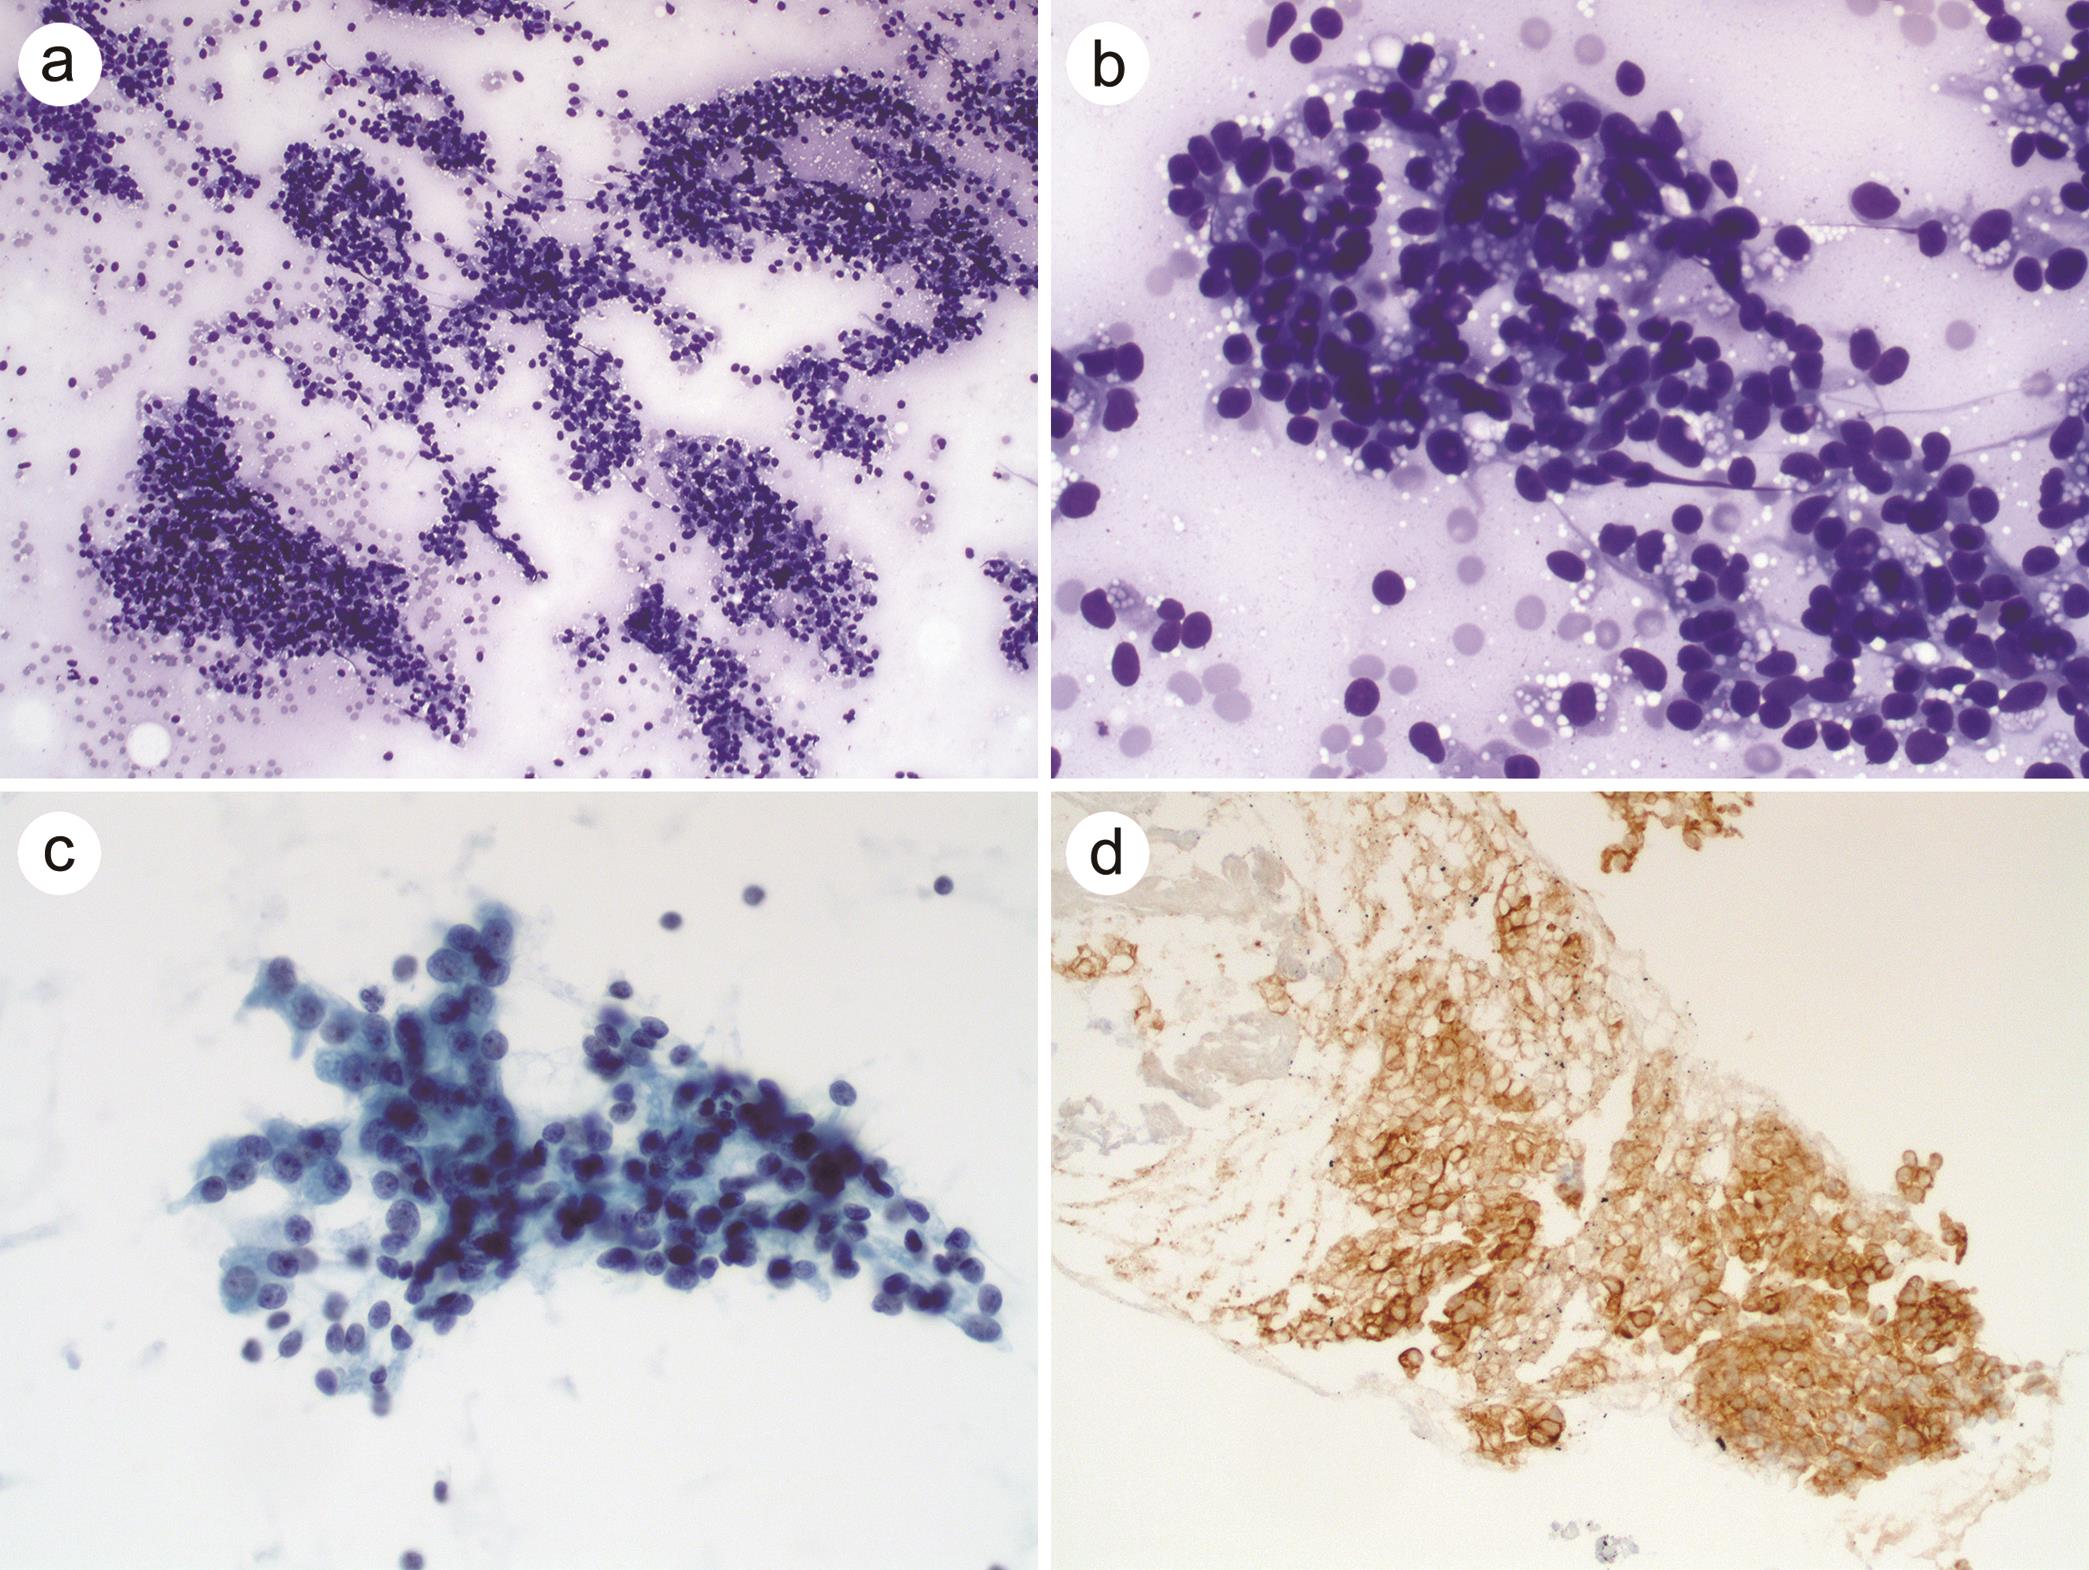 Clear cell/lipid-rich variant of pancreatic neuroendocrine tumors.